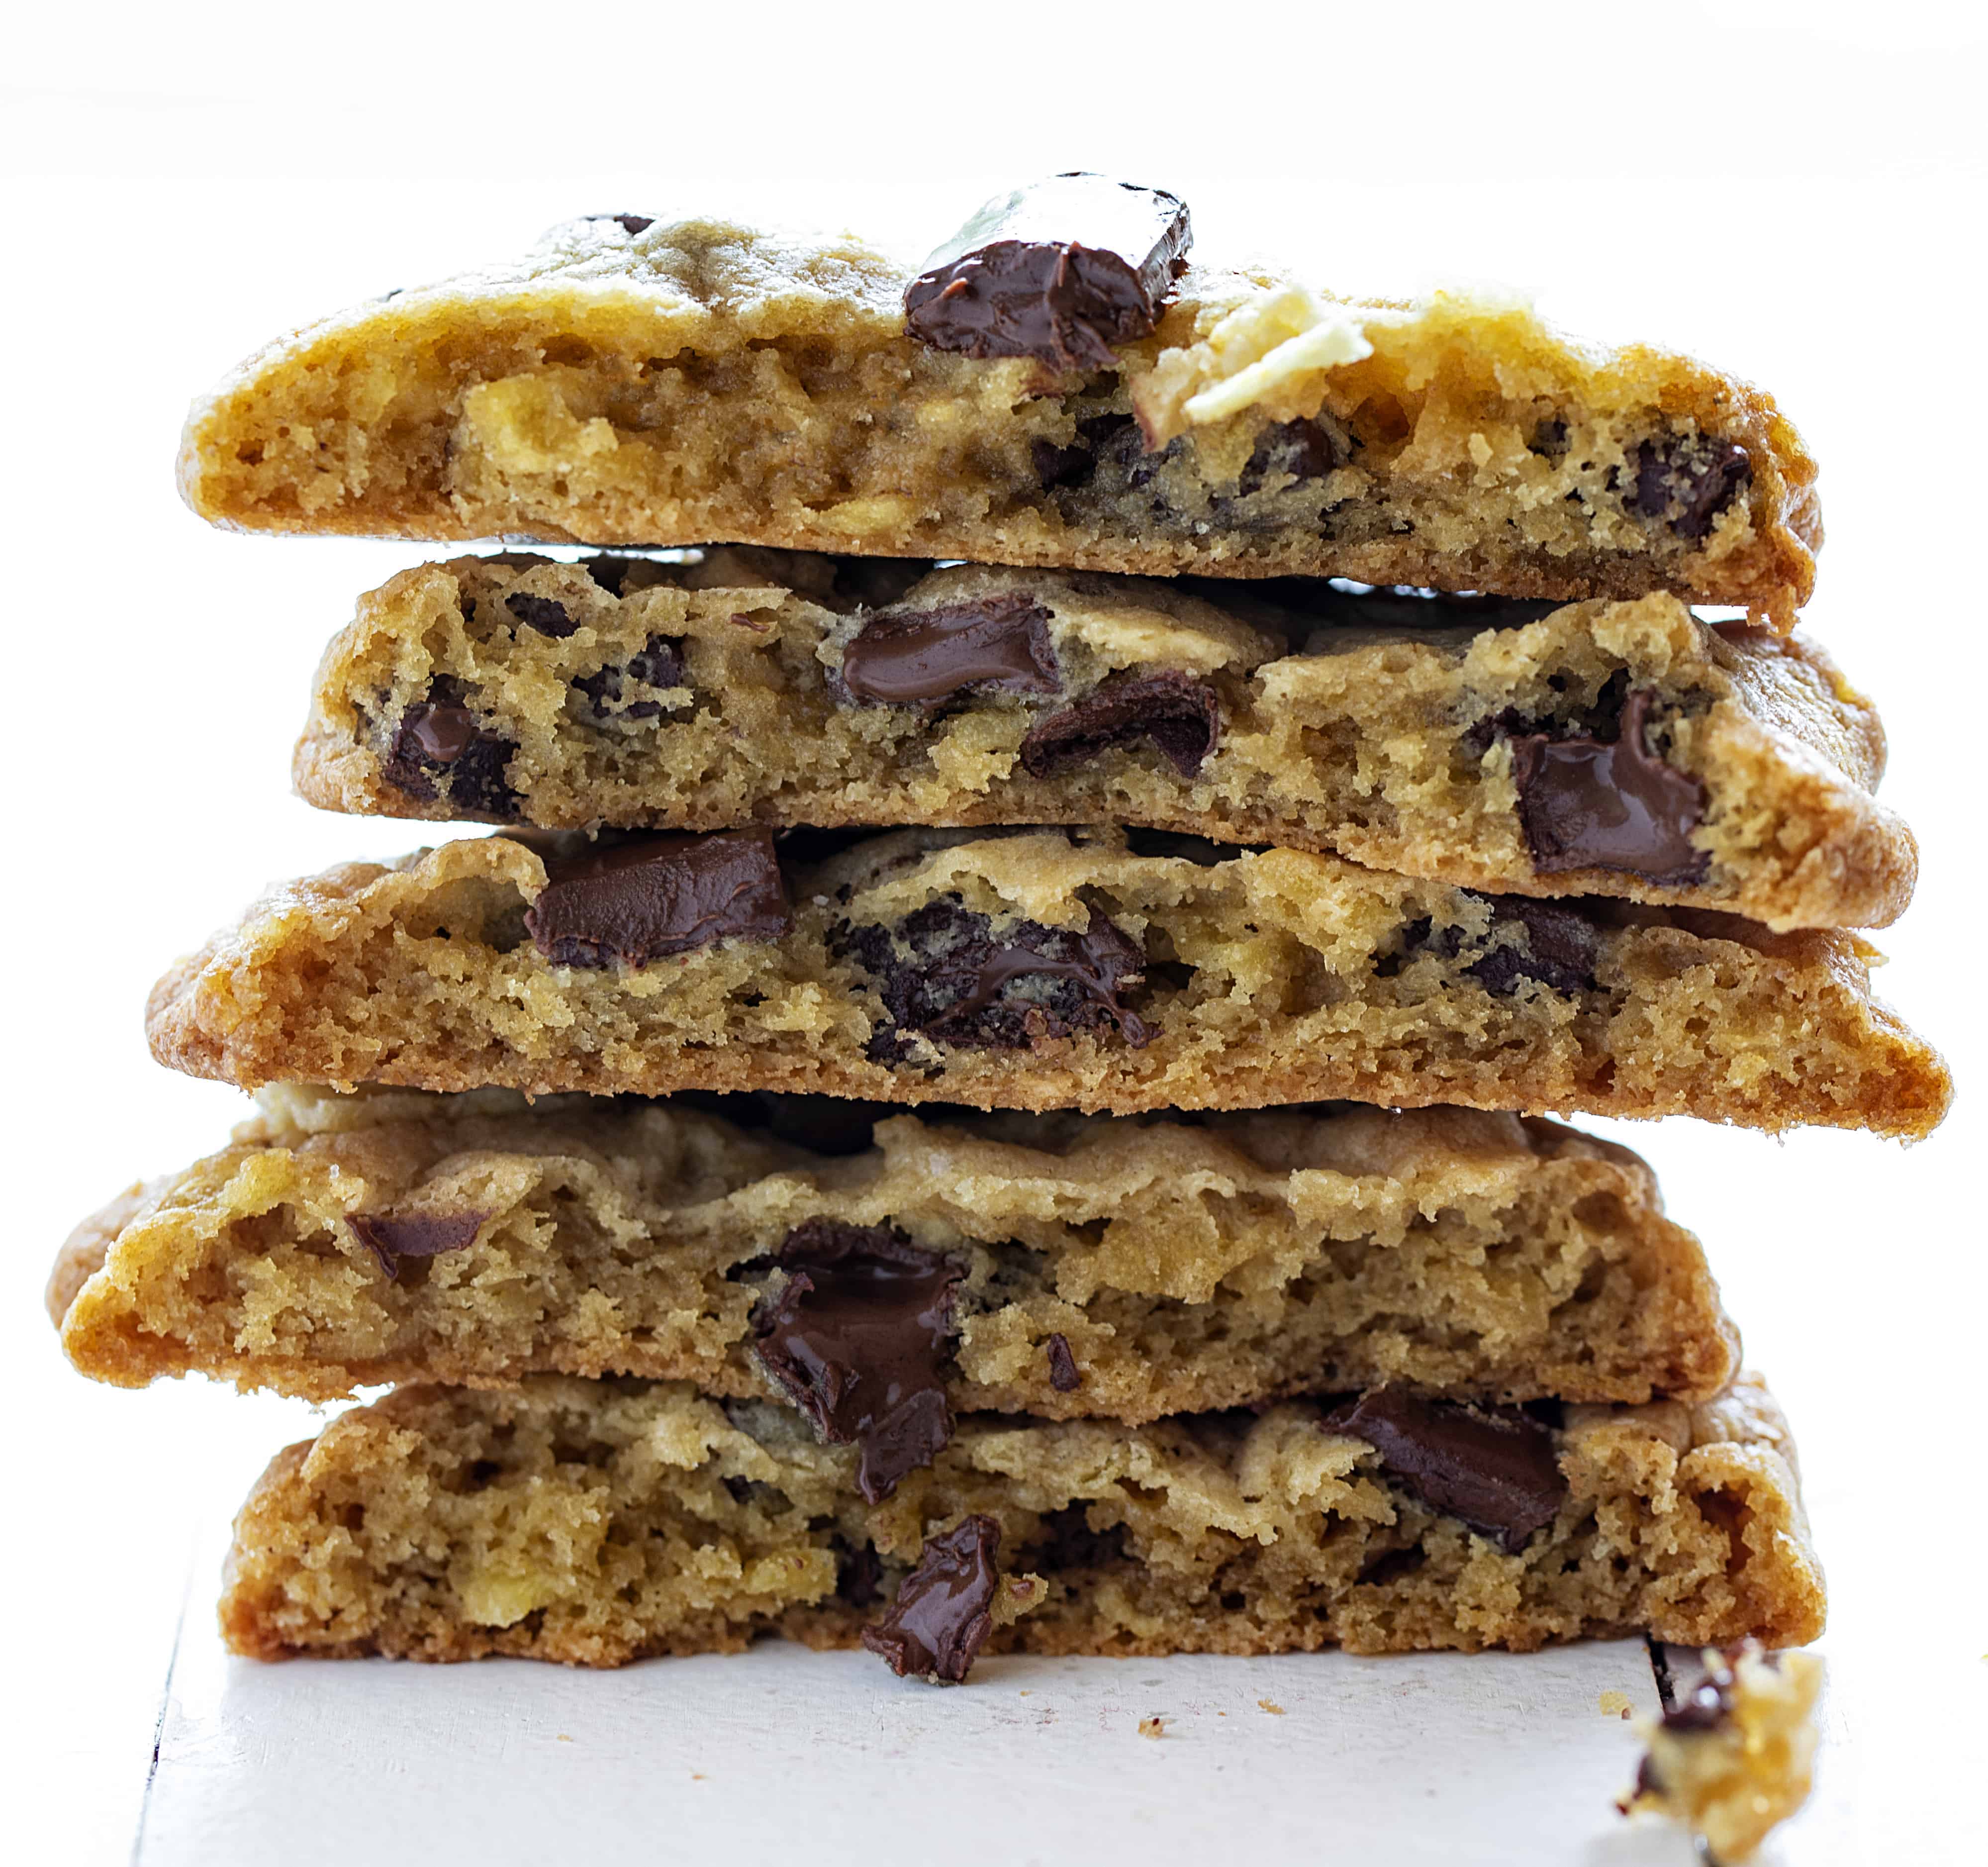 How to Make Potato Chip Chocolate Chip Cookies